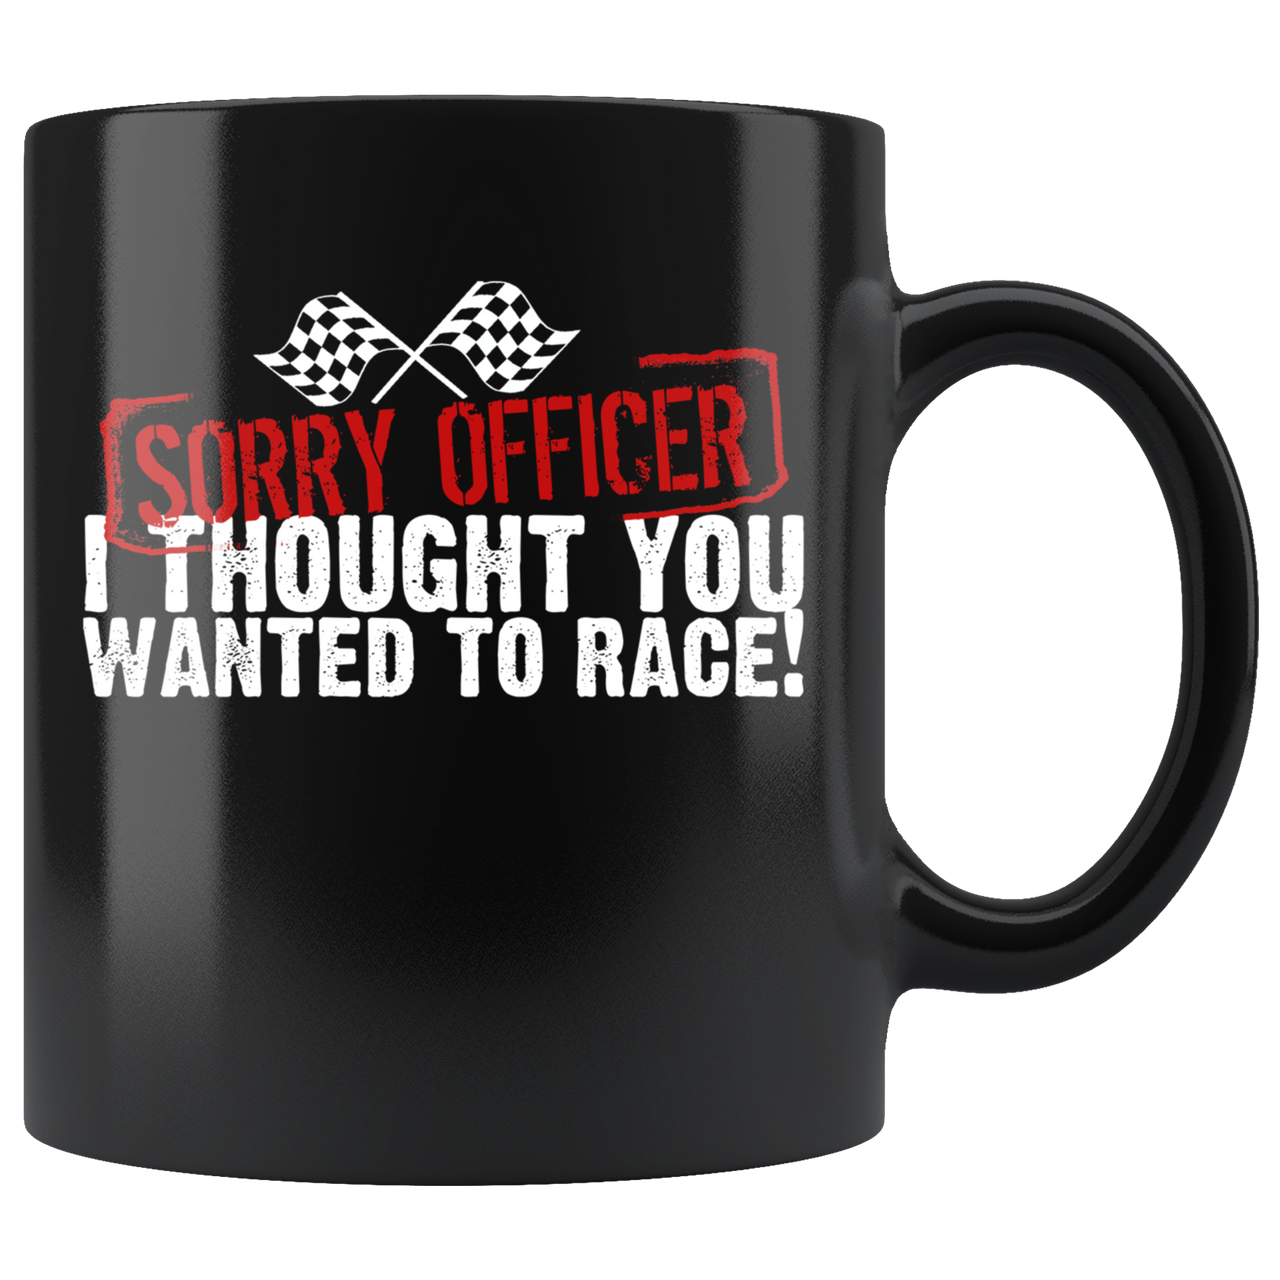 Sorry Officer I Thought You Wanted To Race Mug!